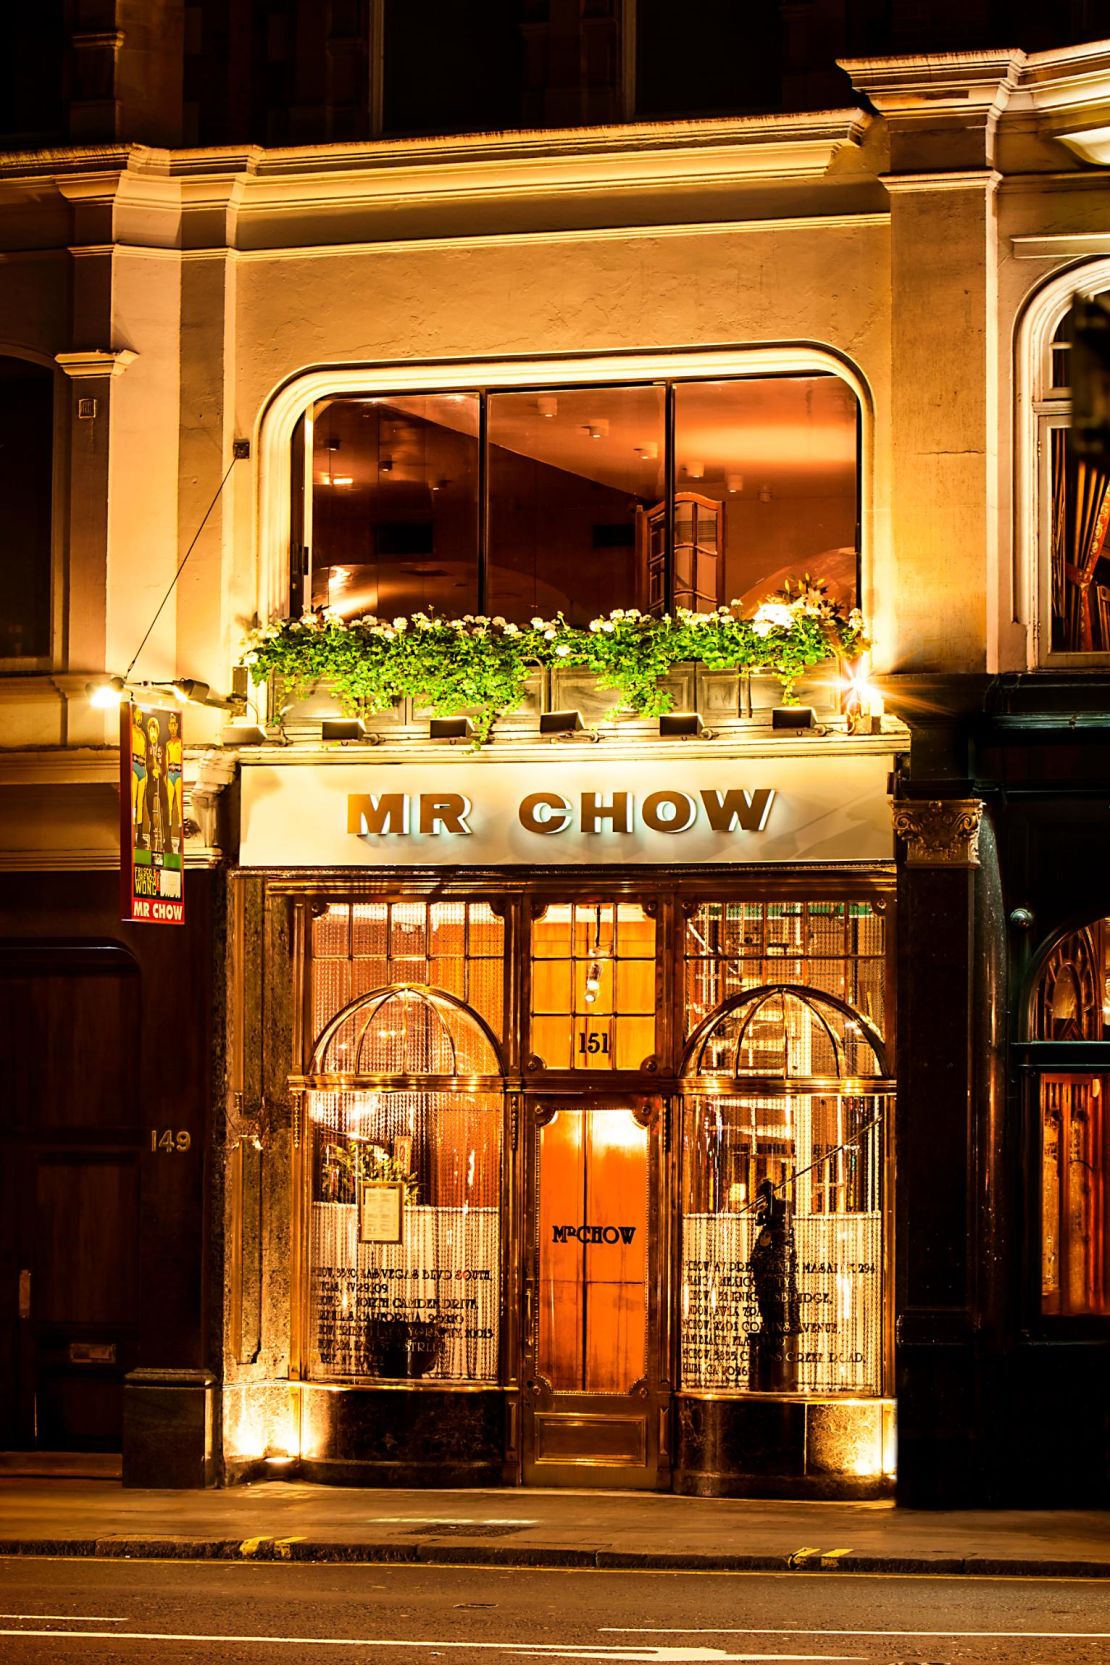 Michael Chow opened his first restaurant in London on Valentine's Day, 1968.